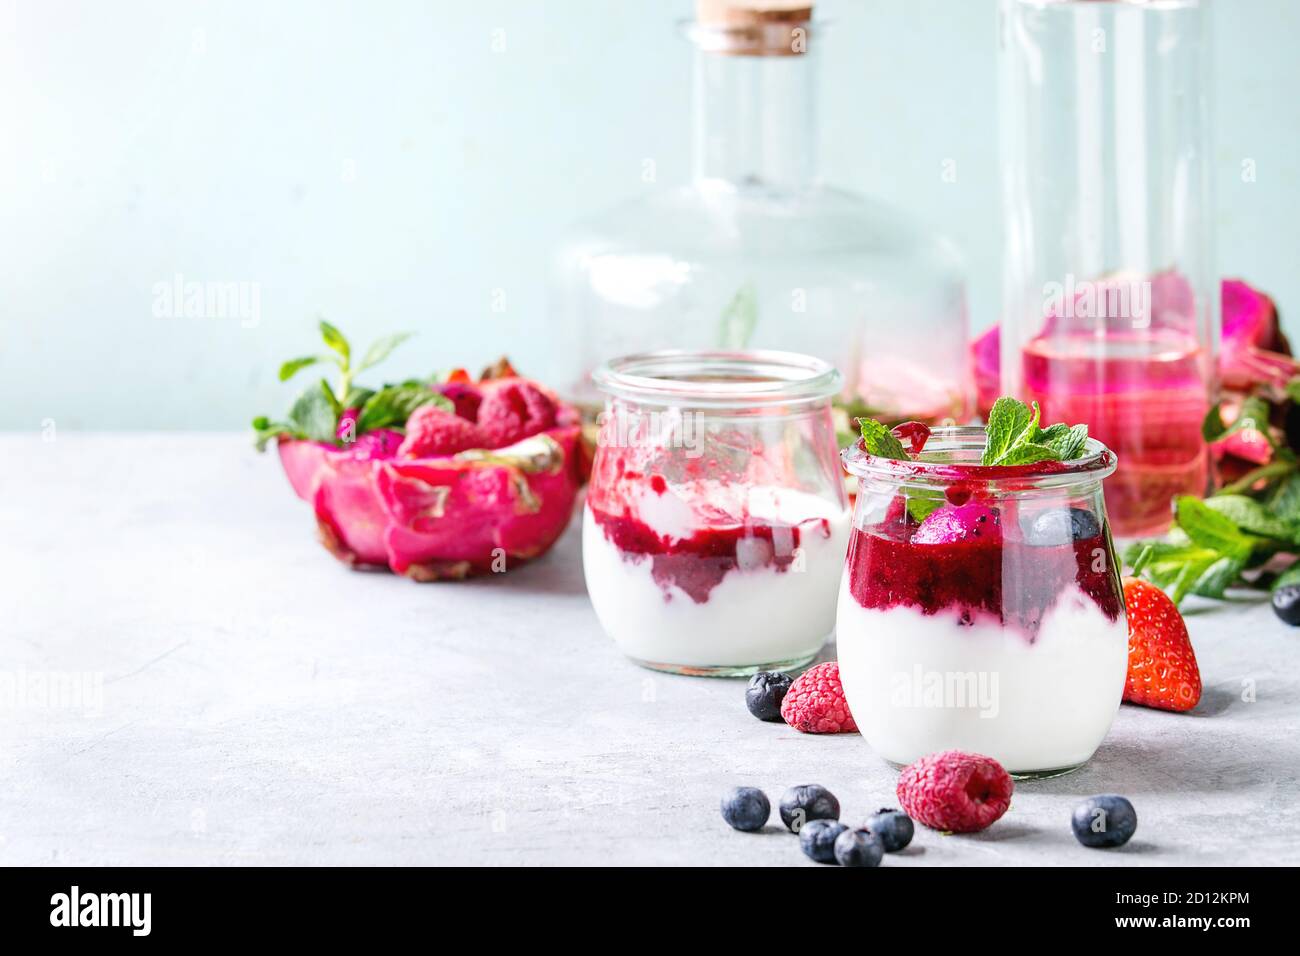 Jars of natural white yogurt with berry sauce, fruit salad with pink dragon fruit, berries and mint, served with bottle of lemonade on grey table. Hea Stock Photo